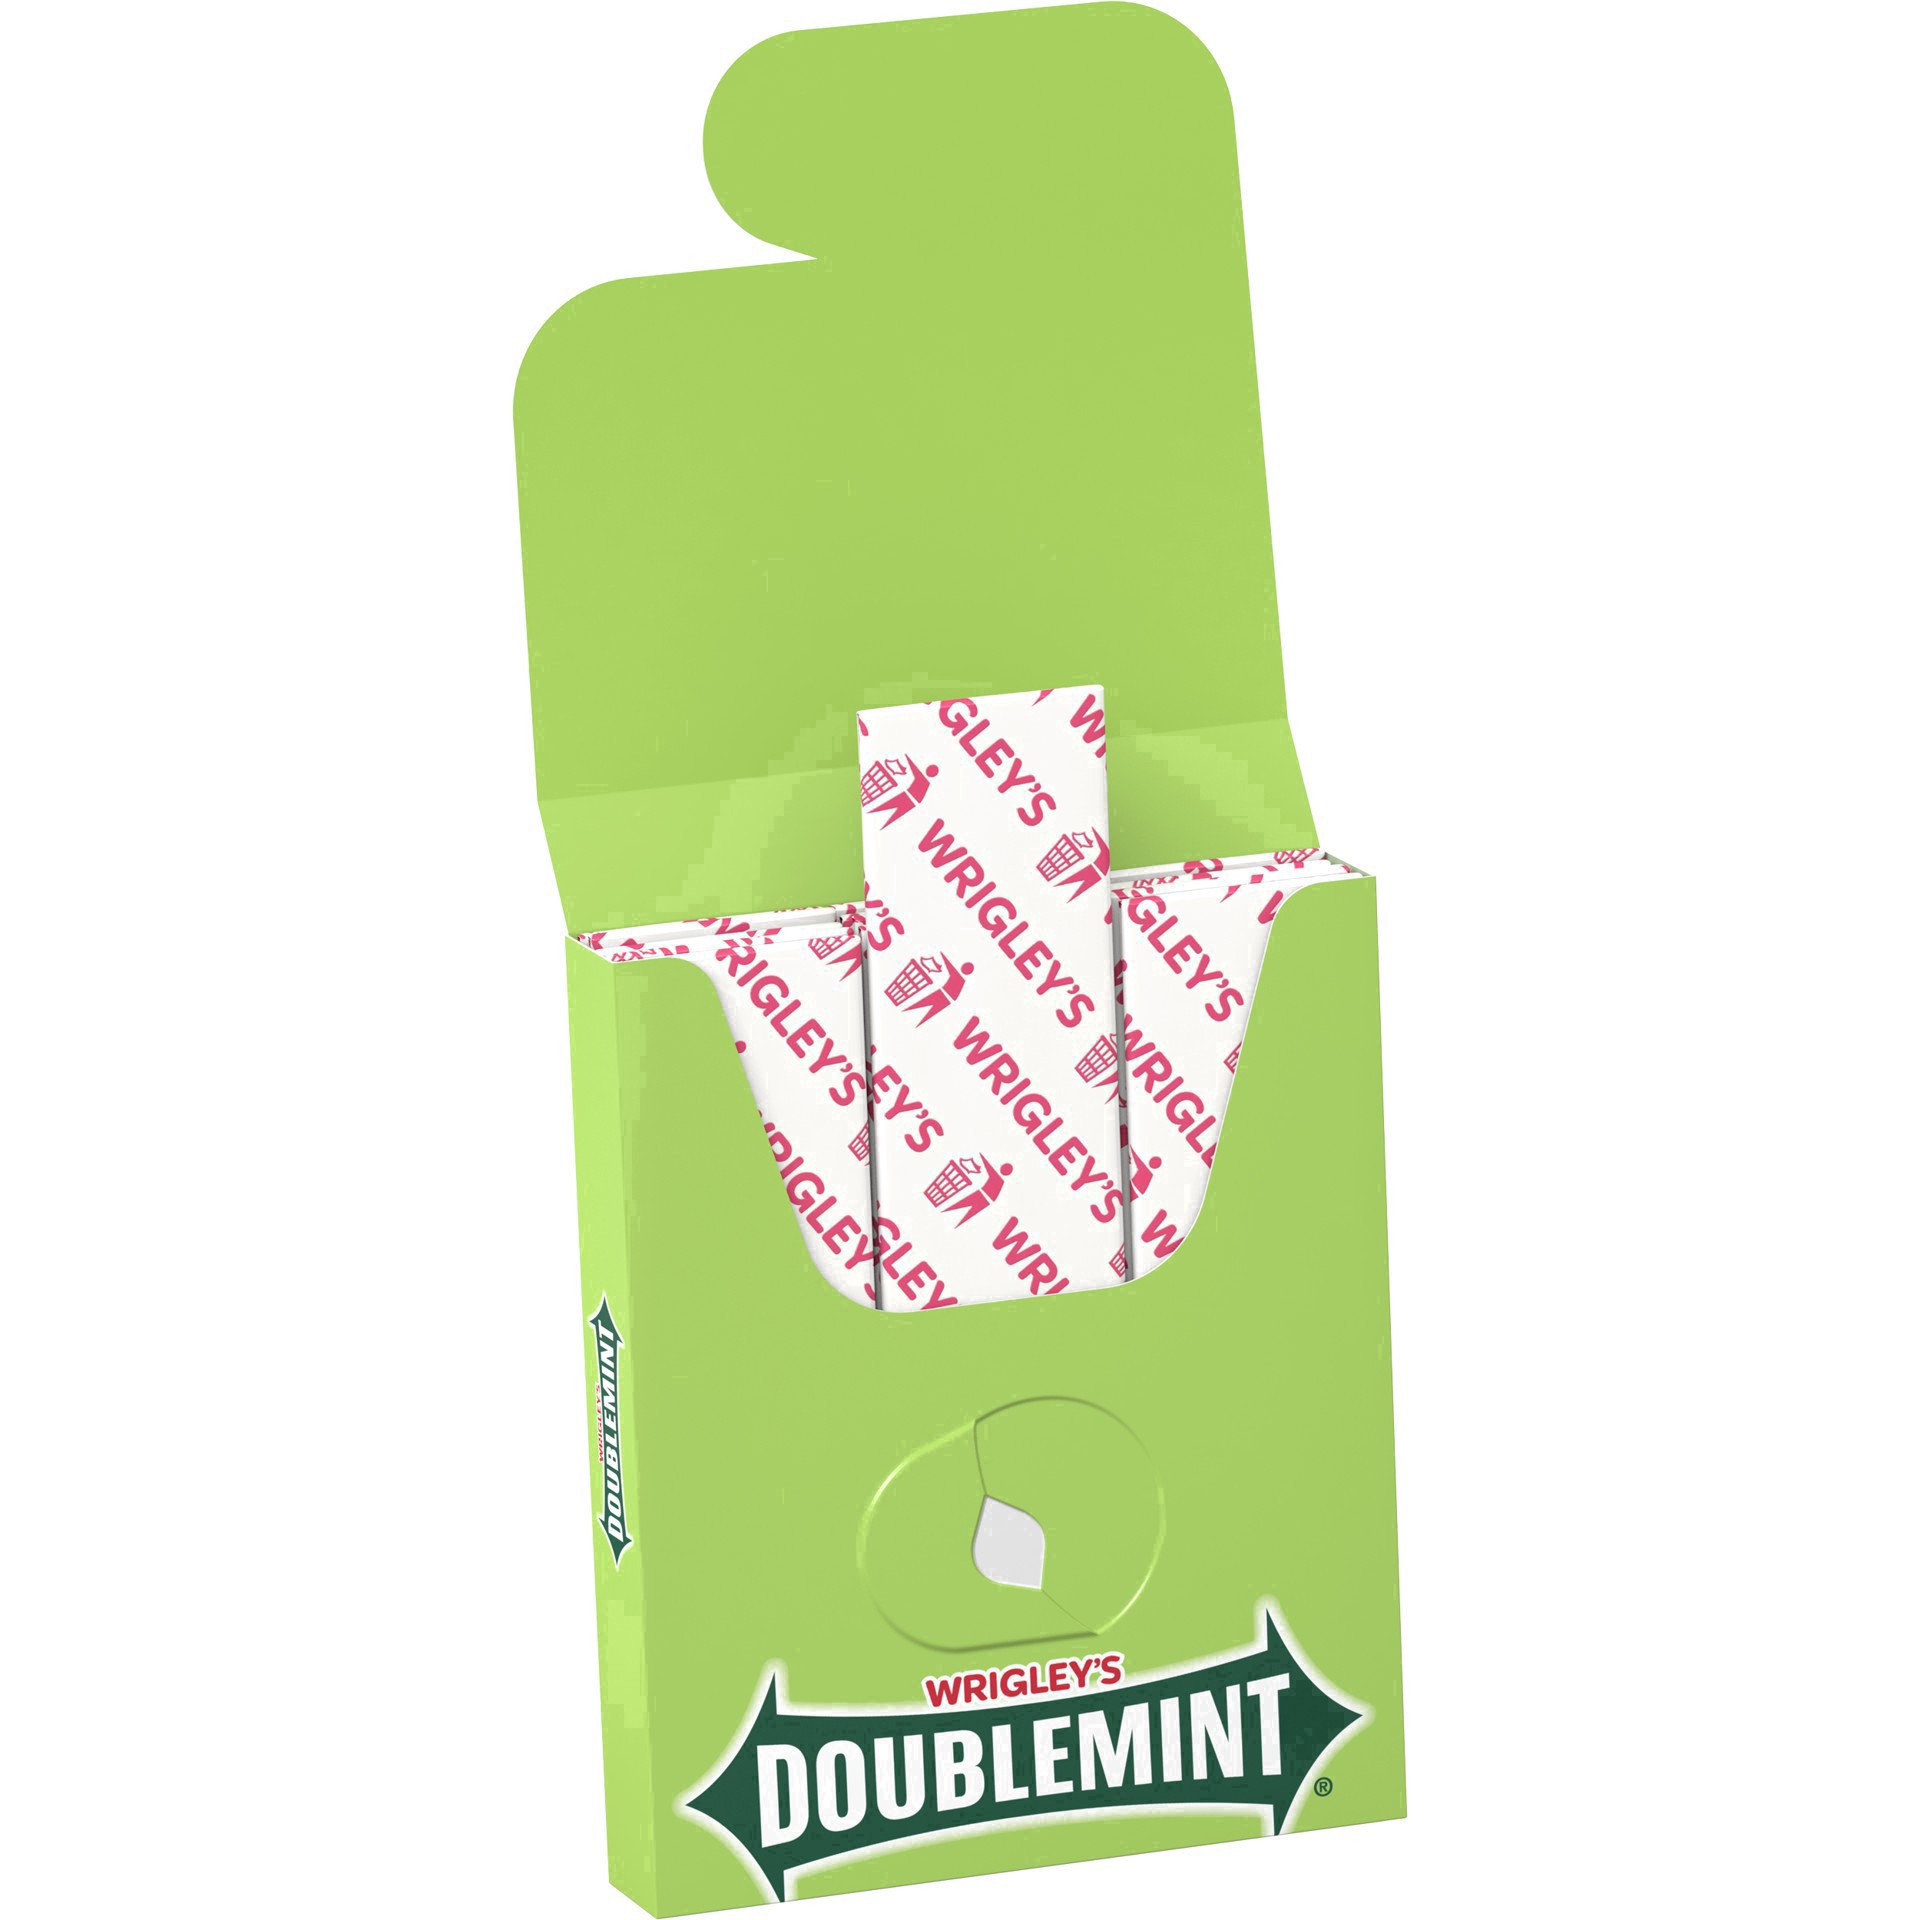 slide 60 of 134, Doublemint WRIGLEY'S DOUBLEMINT Bulk Chewing Gum, Value Pack, 15 ct (3 Pack), 45 ct